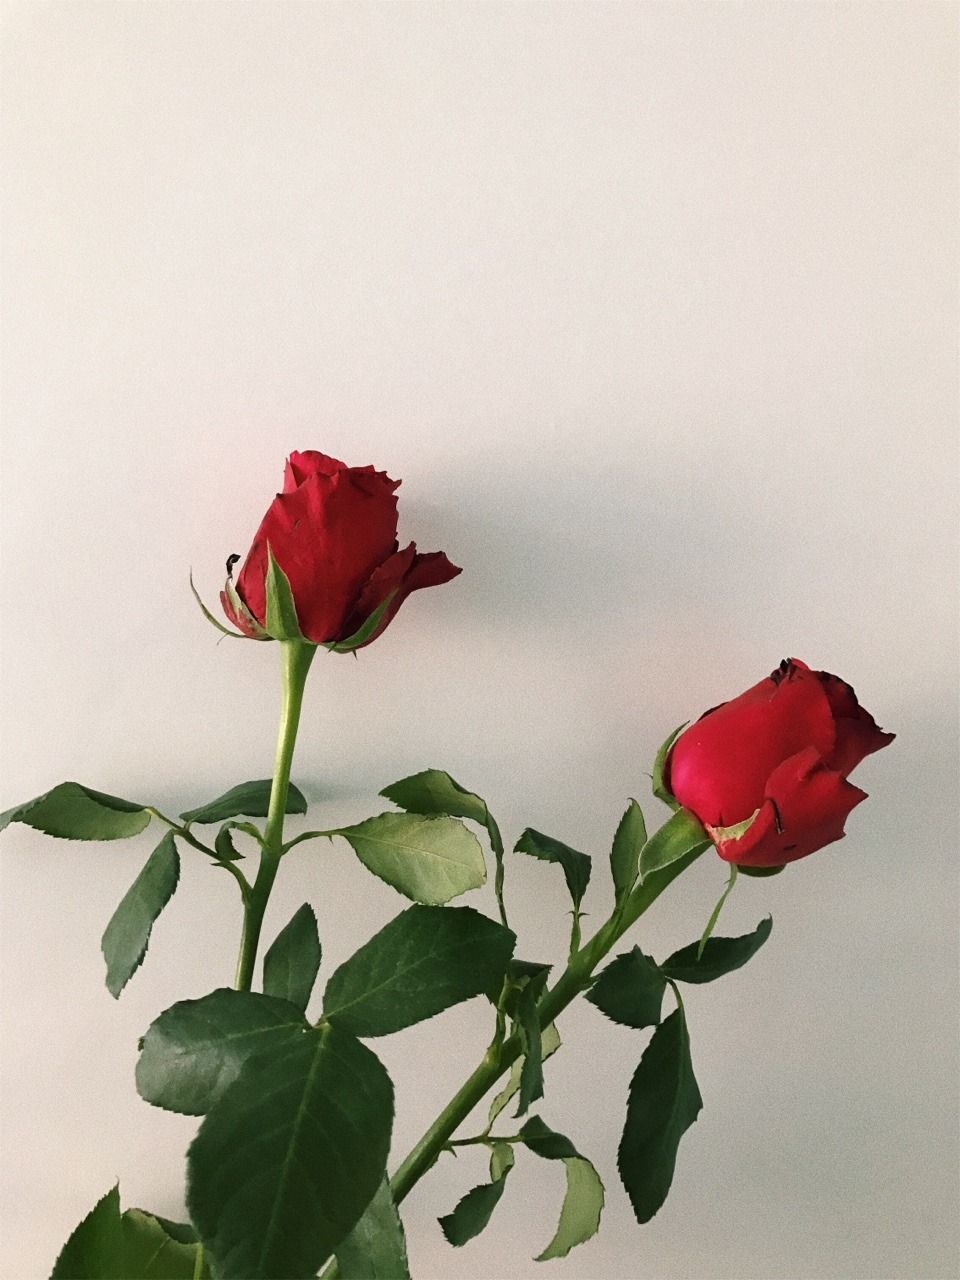 A vase with two red roses in it - Roses